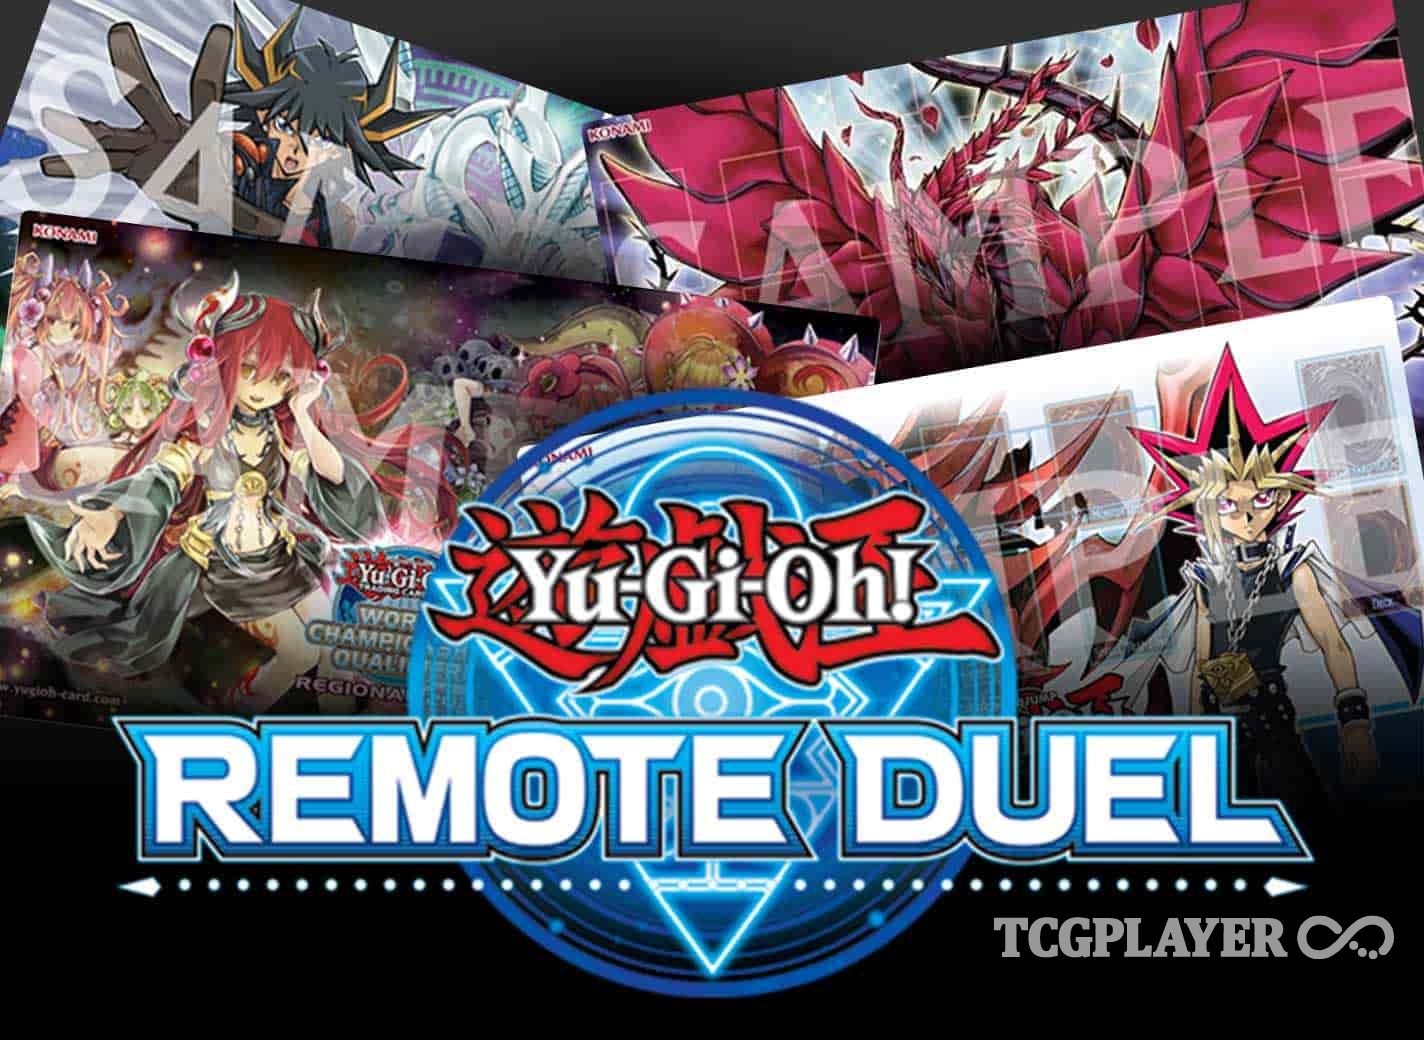 HUGE Changes at the Yu-Gi-Oh Extravaganza This Weekend! | TCGplayer